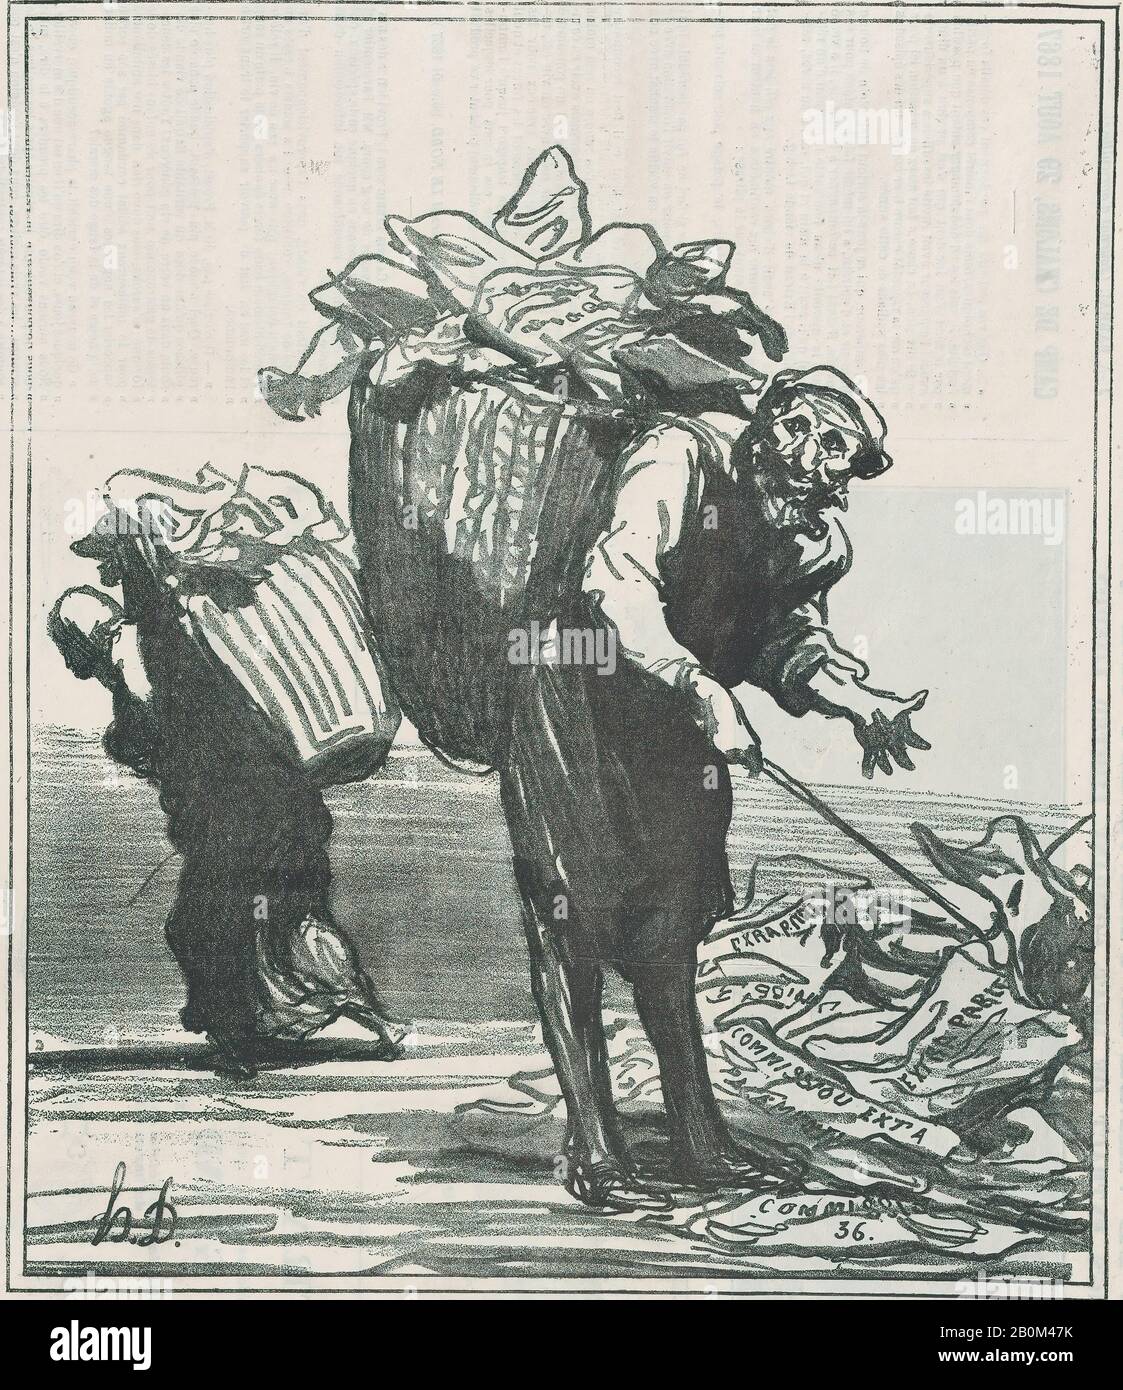 Honoré Daumier, Poor extra parliamentary commission! They probably just wanted to make room for some victory bulletins, from 'News of the day,' published in Le Charivari, July 28, 1870, 'News of the day' (Actualités), Honoré Daumier (French, Marseilles 1808–1879 Valmondois), July 28, 1870, Lithograph on newsprint; second state of two (Delteil), Image: 10 3/16 × 8 11/16 in. (25.9 × 22 cm), Sheet: 11 9/16 × 11 9/16 in. (29.3 × 29.4 cm), Prints Stock Photo